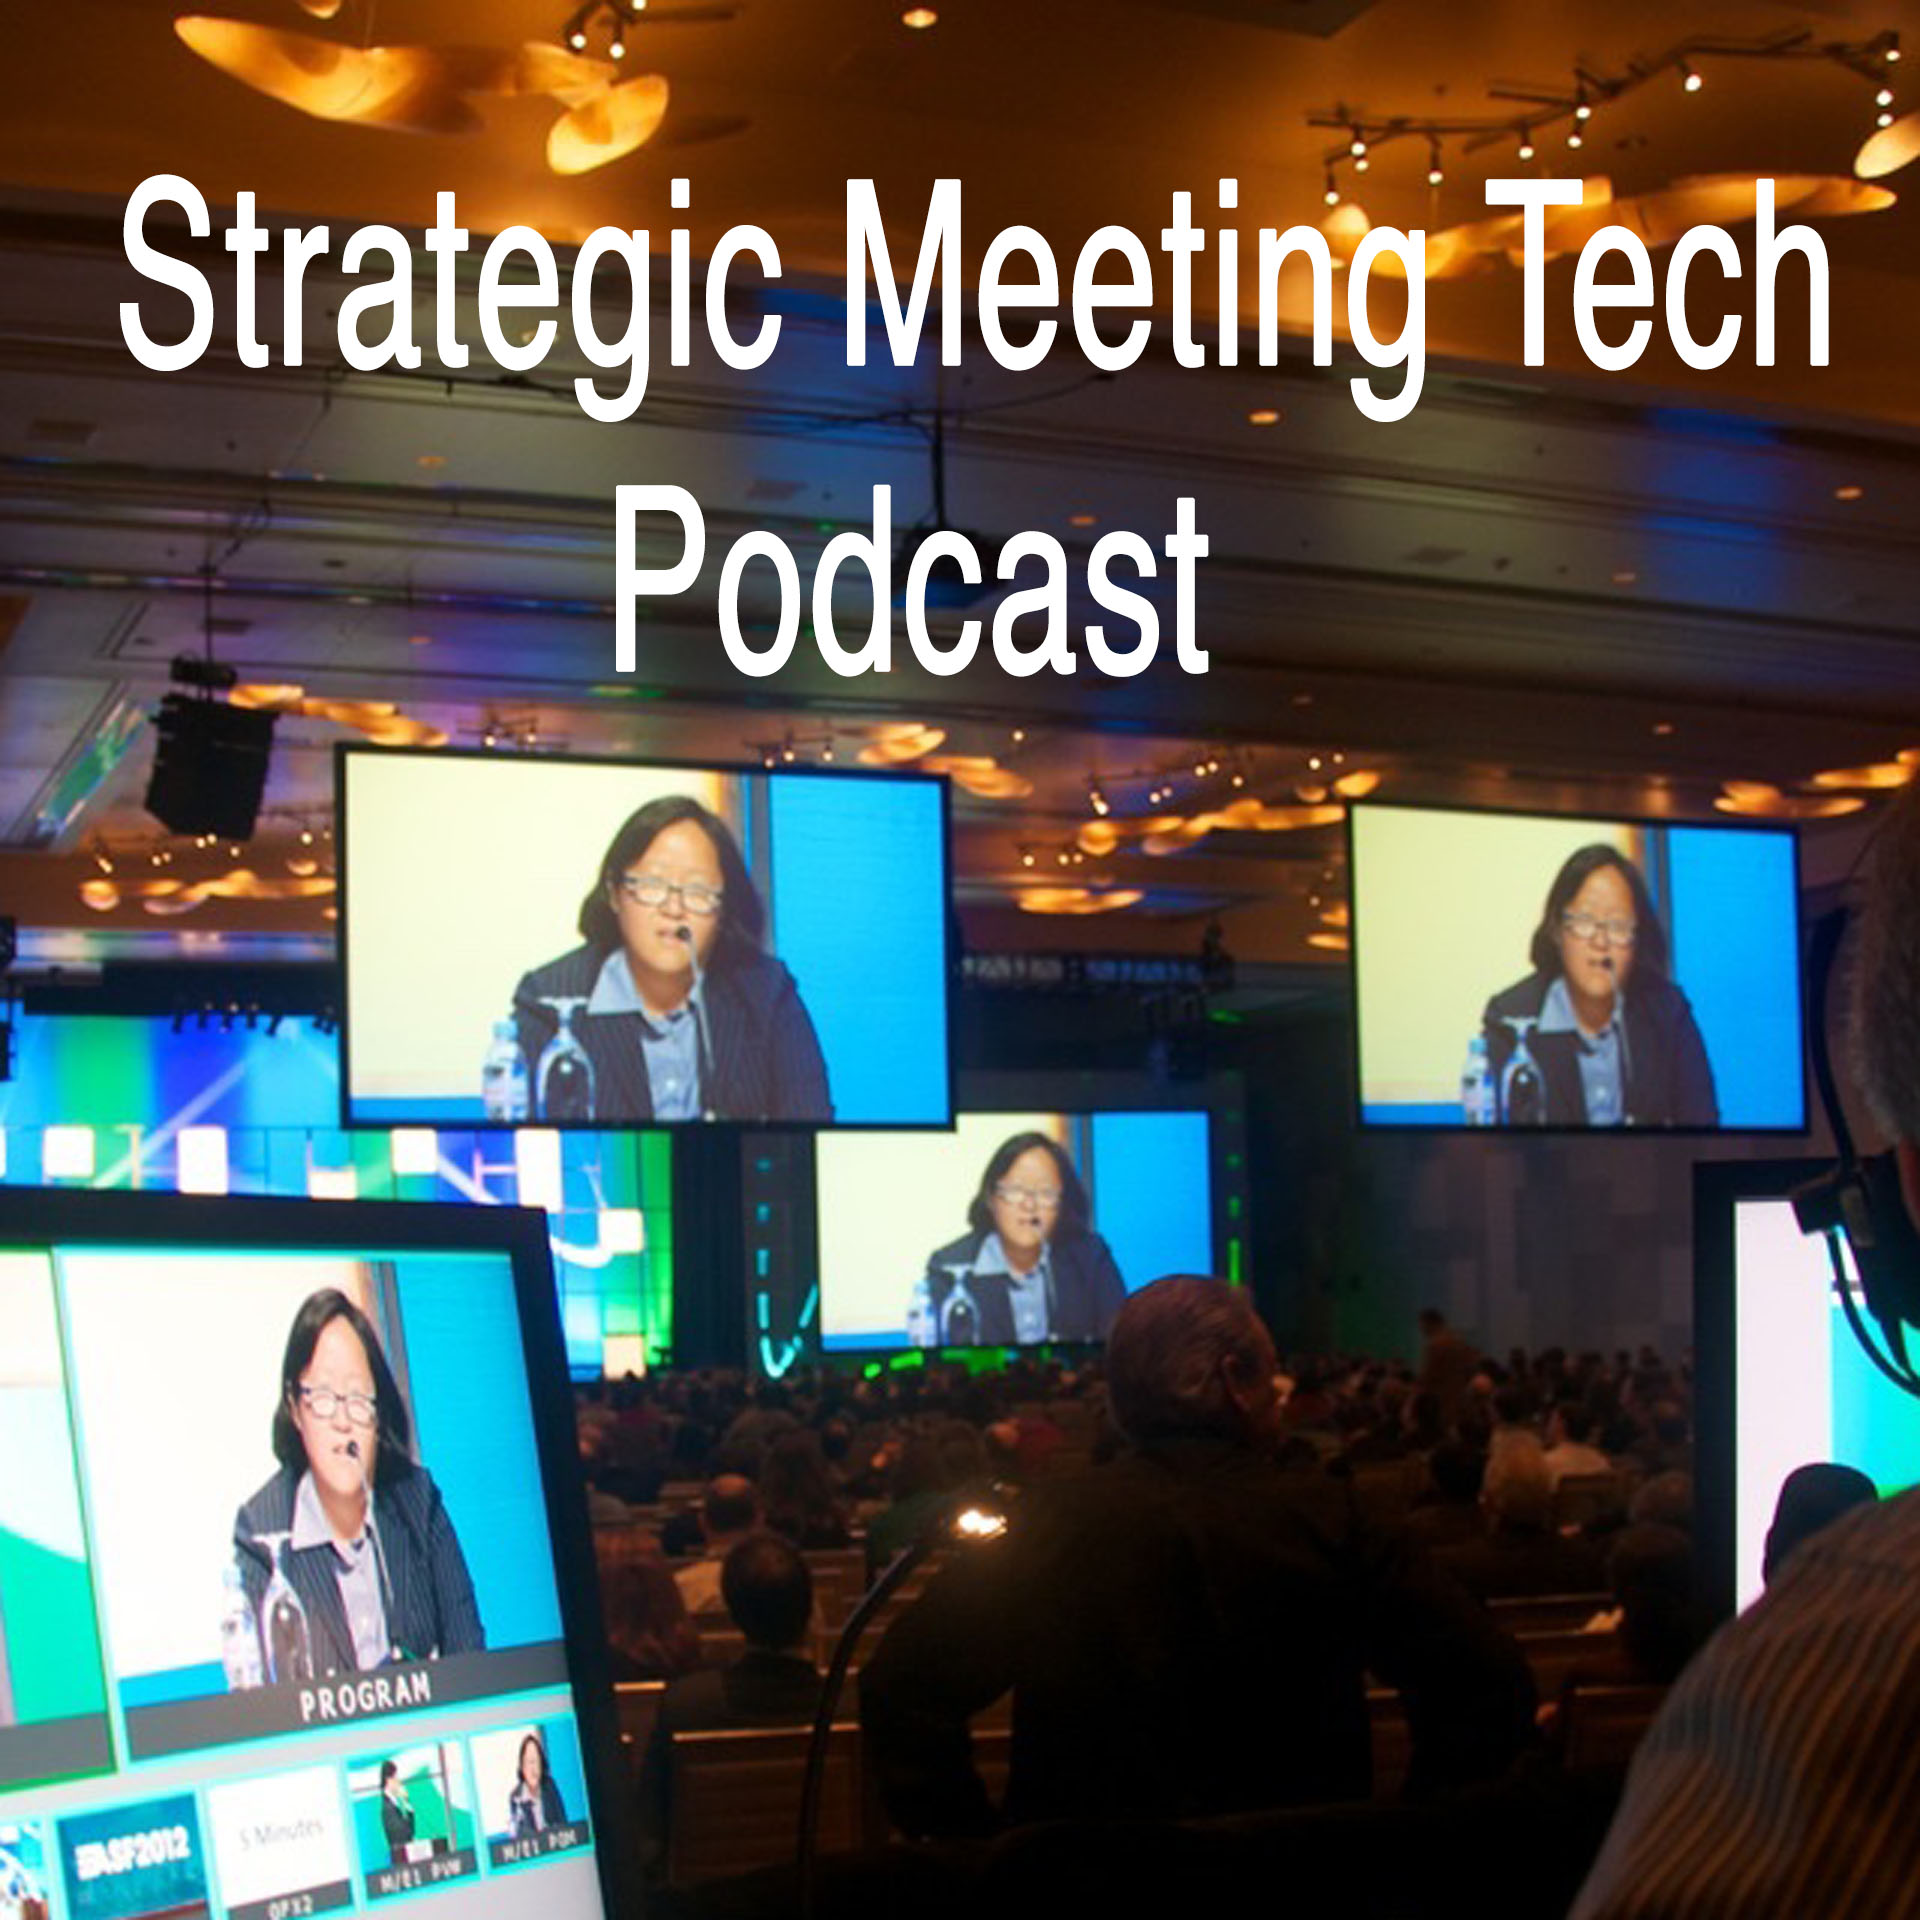 Strategic Meeting Tech Podcast Show #27 - Roger Rickard discusses the upcoming election and how voting (or not voting) impacts all of us in the meetings industry